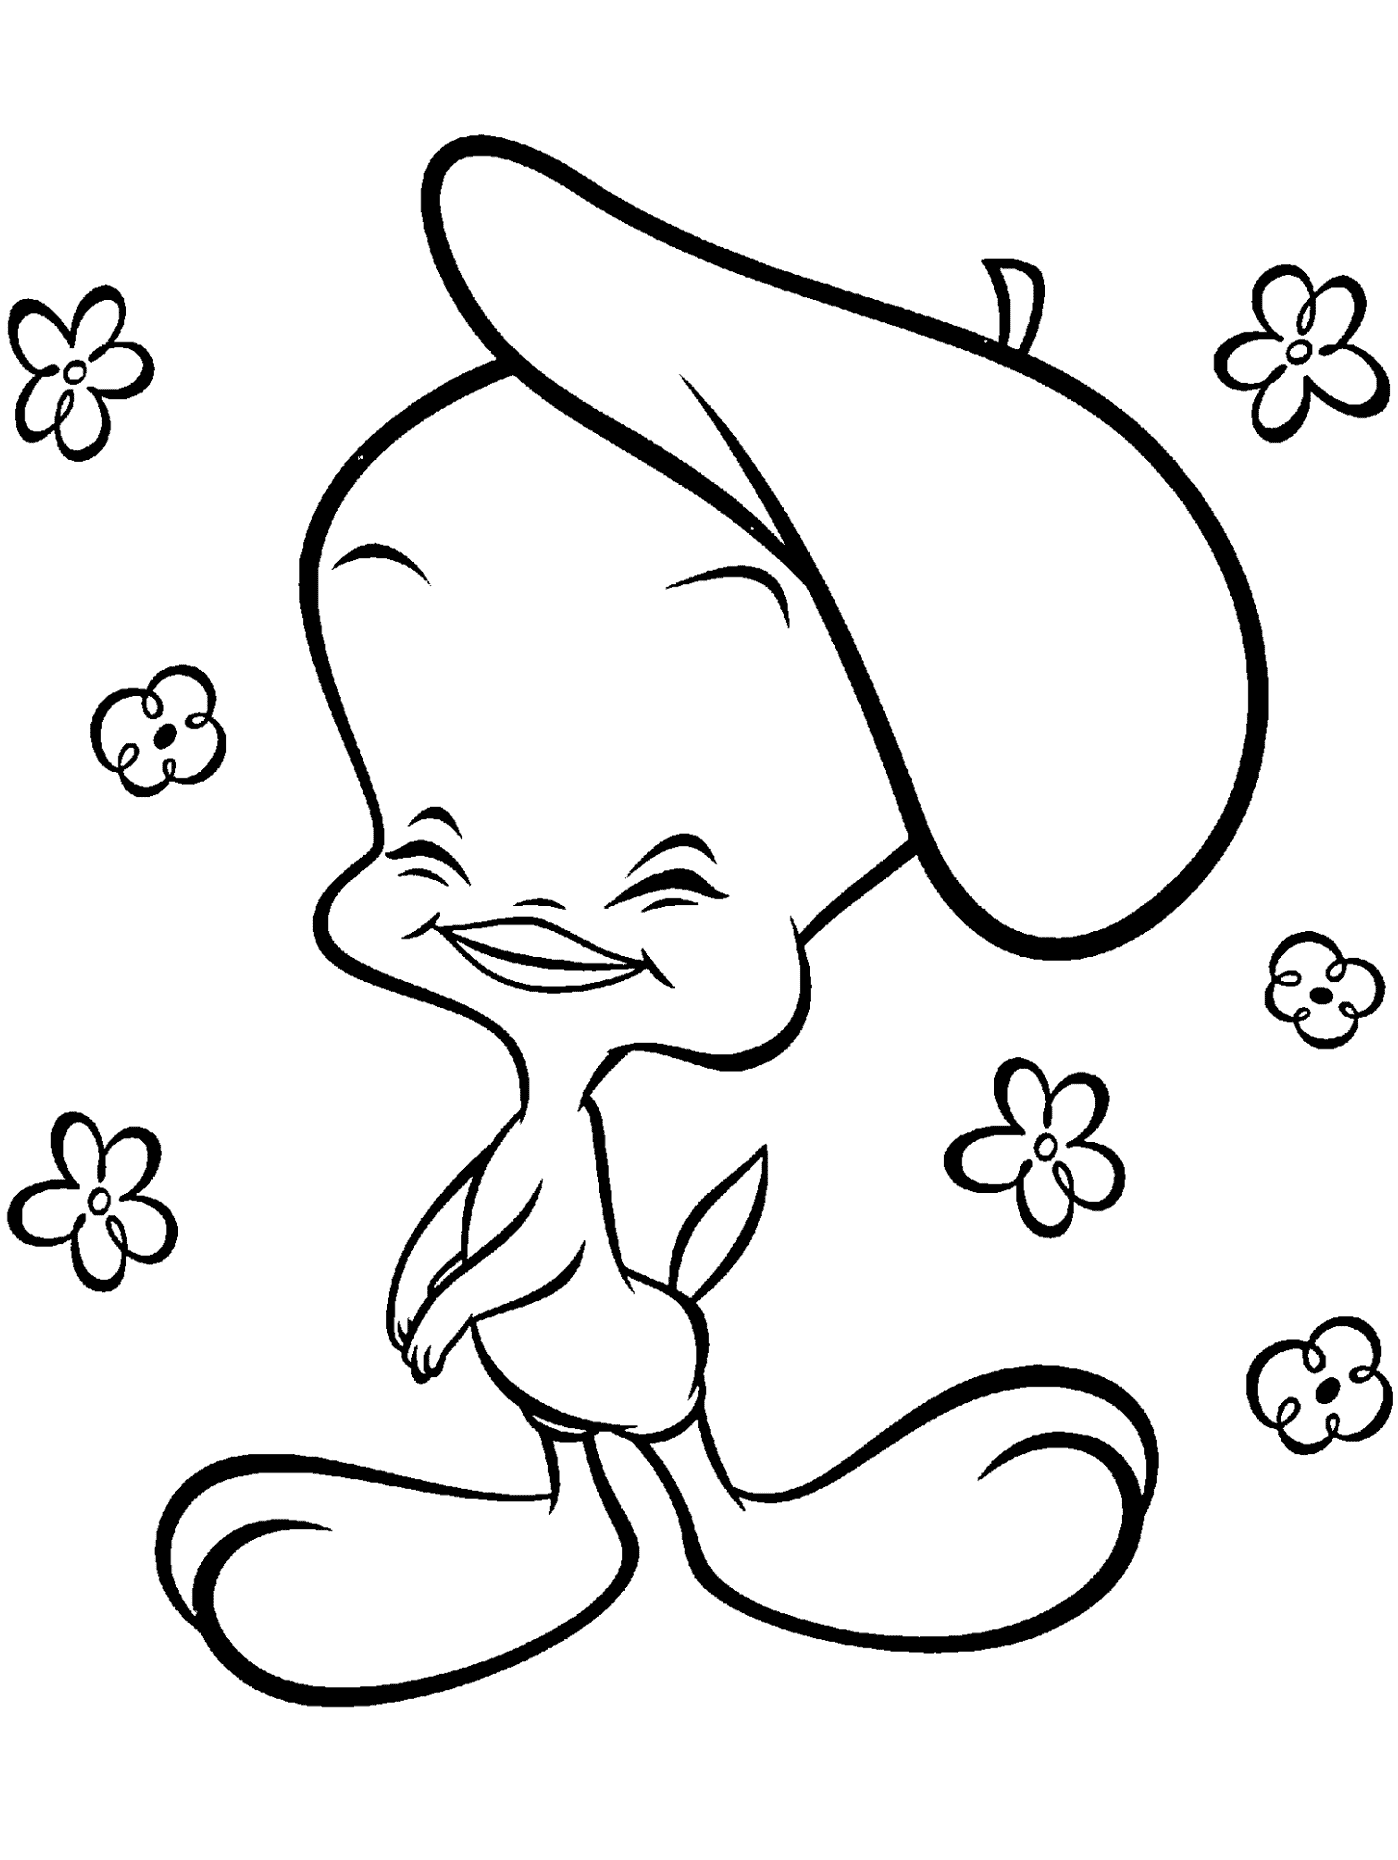 Free Download Of Tweety Coloring Pages Of Tweety Coloring Pages Of Tweety 1398x1860 For Your Desktop Mobile Tablet Explore 47 Easter Tweety Wallpaper Tweety Bird Wallpapers Free Tweety Halloween Wallpaper